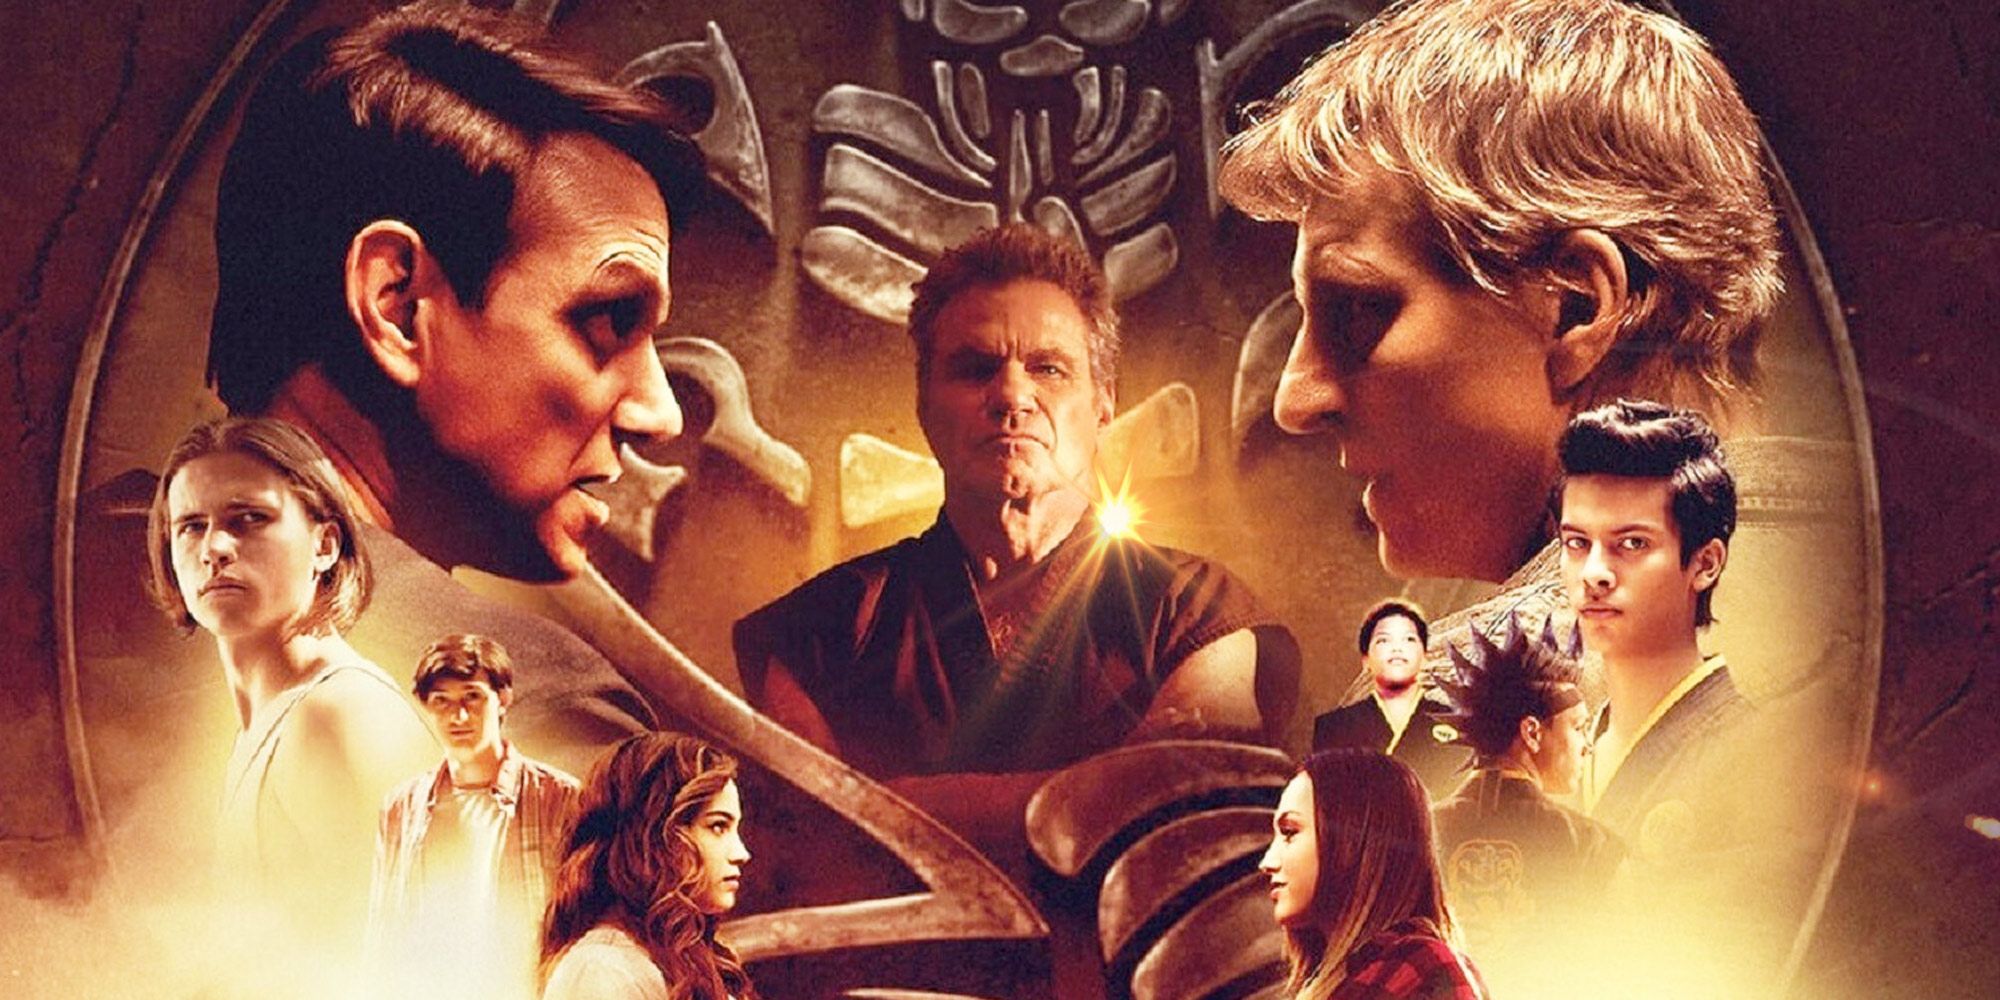 A poster for Cobra Kai showcasing the main characters